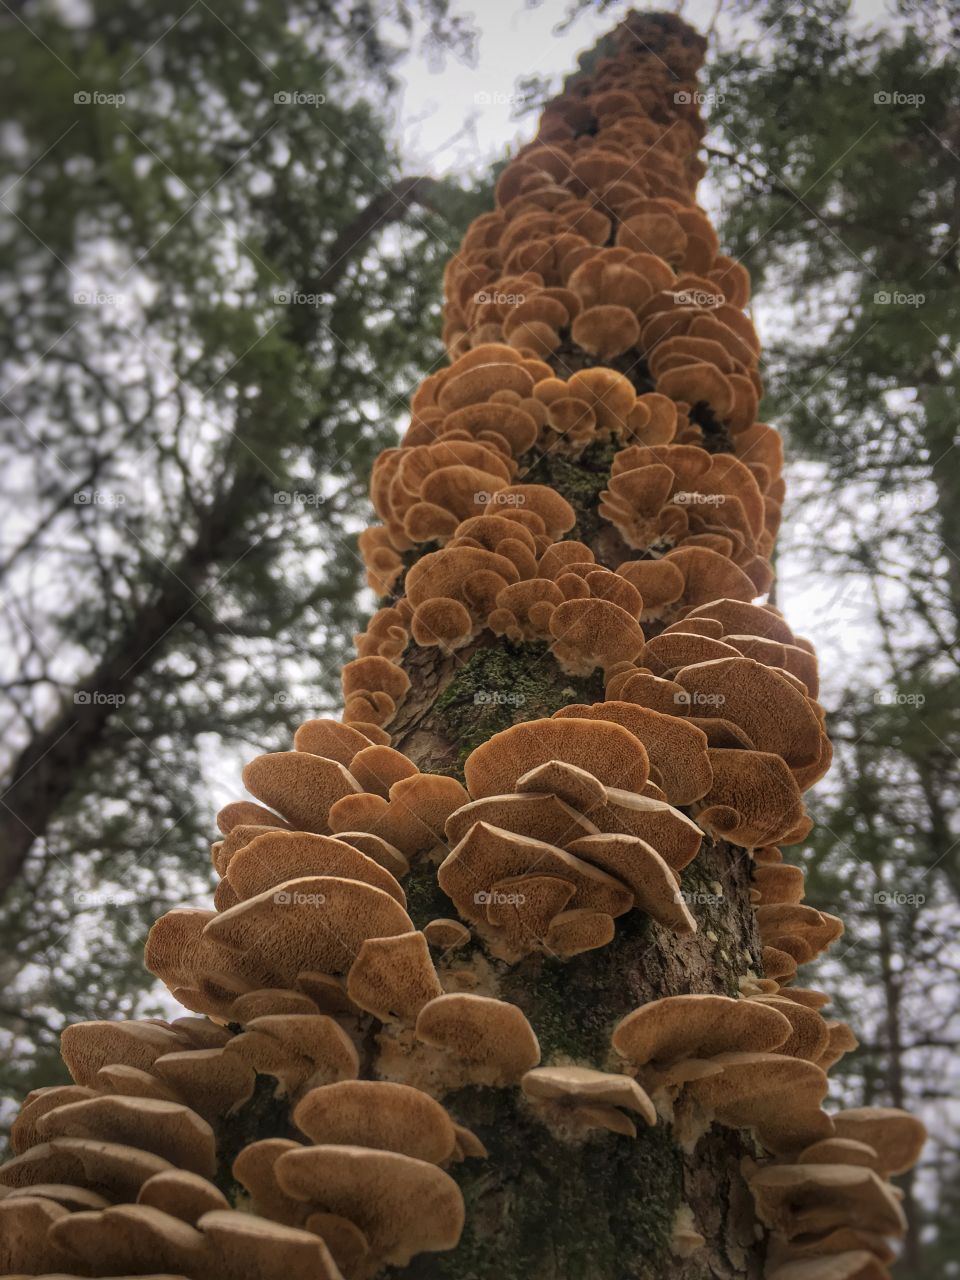 Forest fungi in Maine